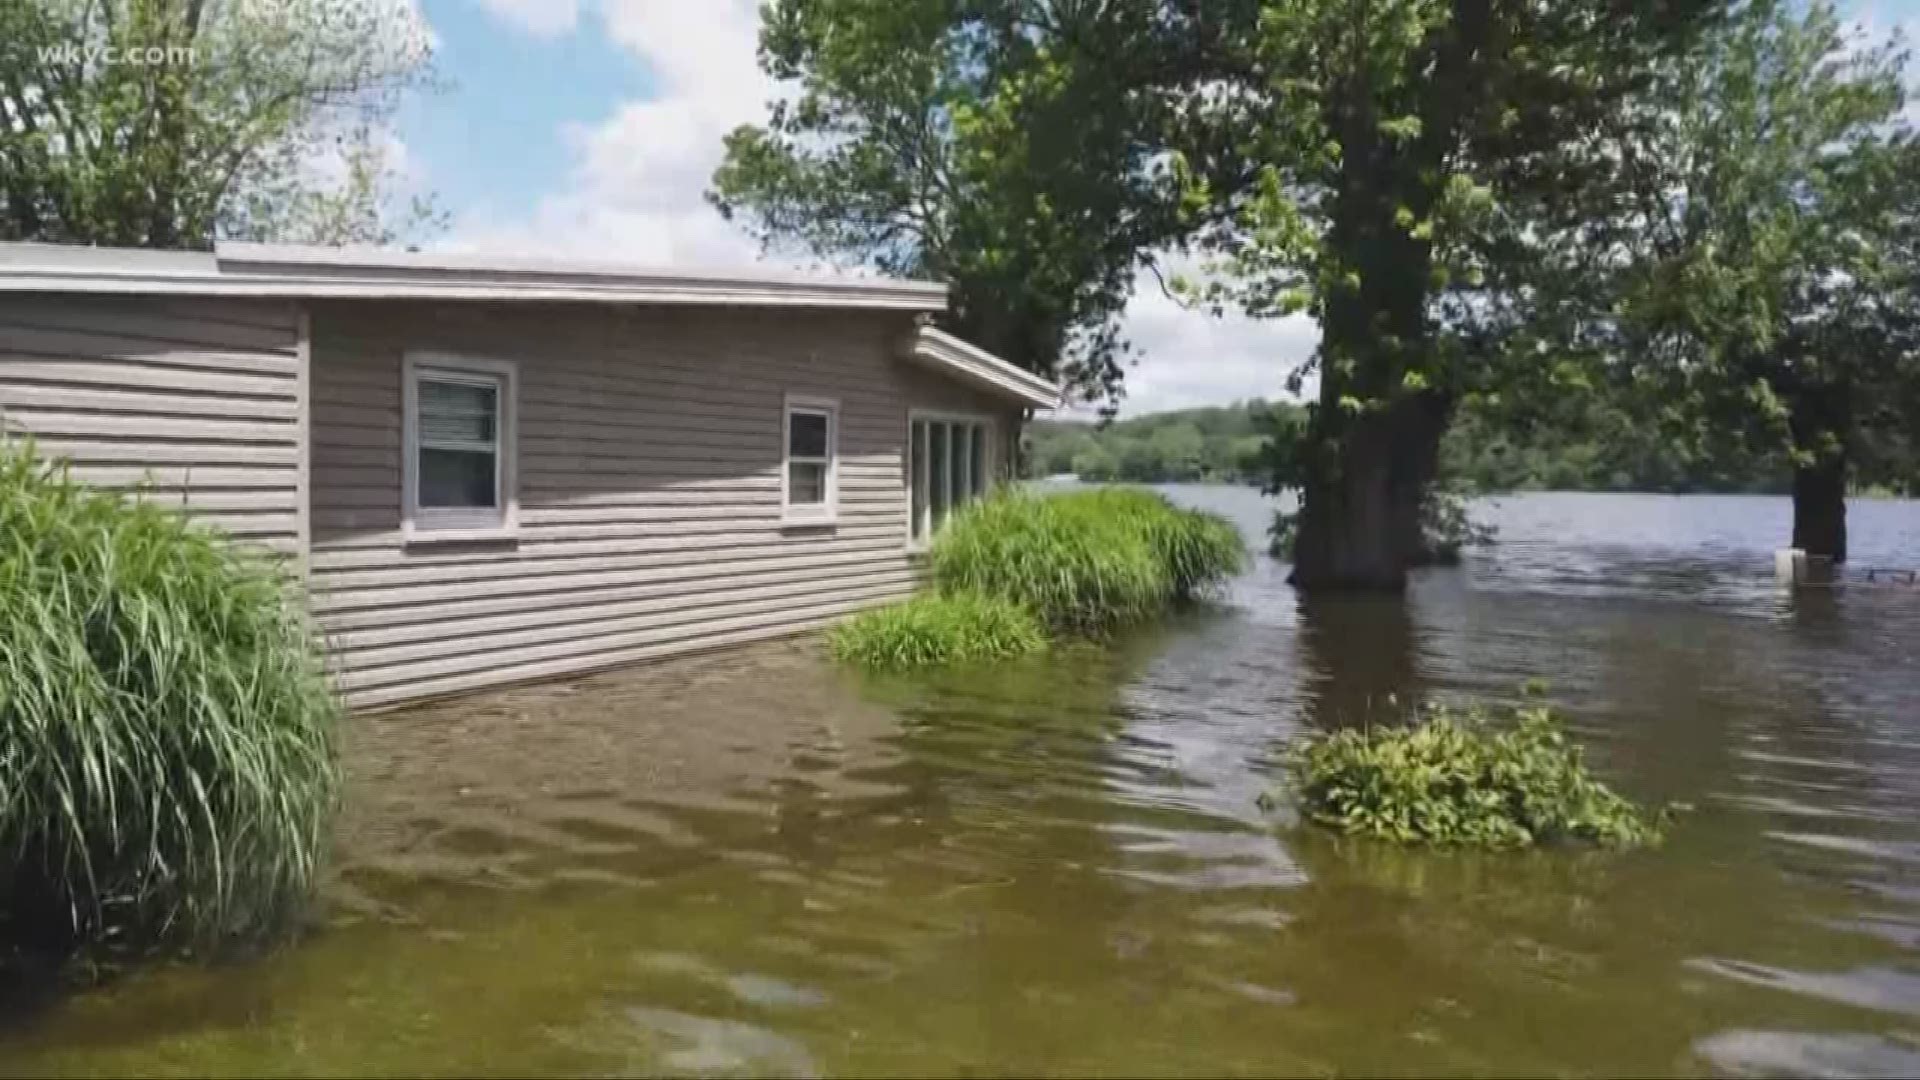 Residents of Luna Lake are still using boats to get through the floodwaters. In some areas, as much as five feet deep.